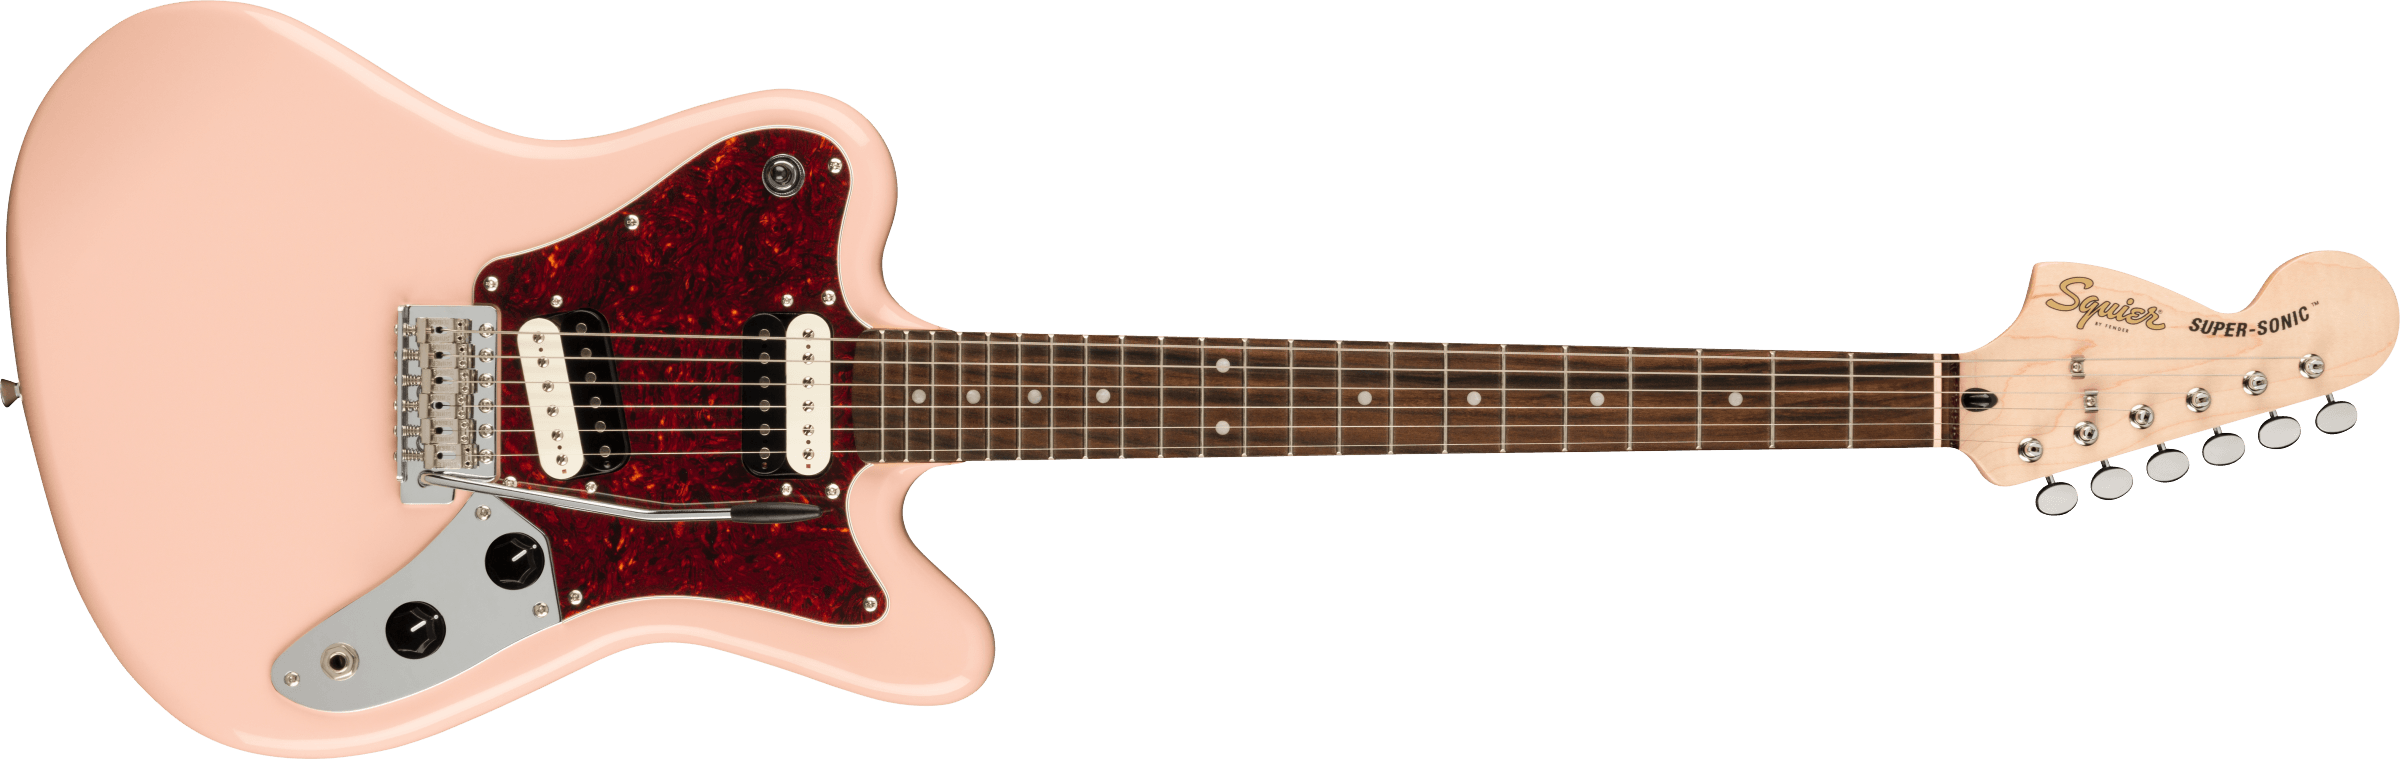 File:Squier Super-Sonic.png - Wikipedia